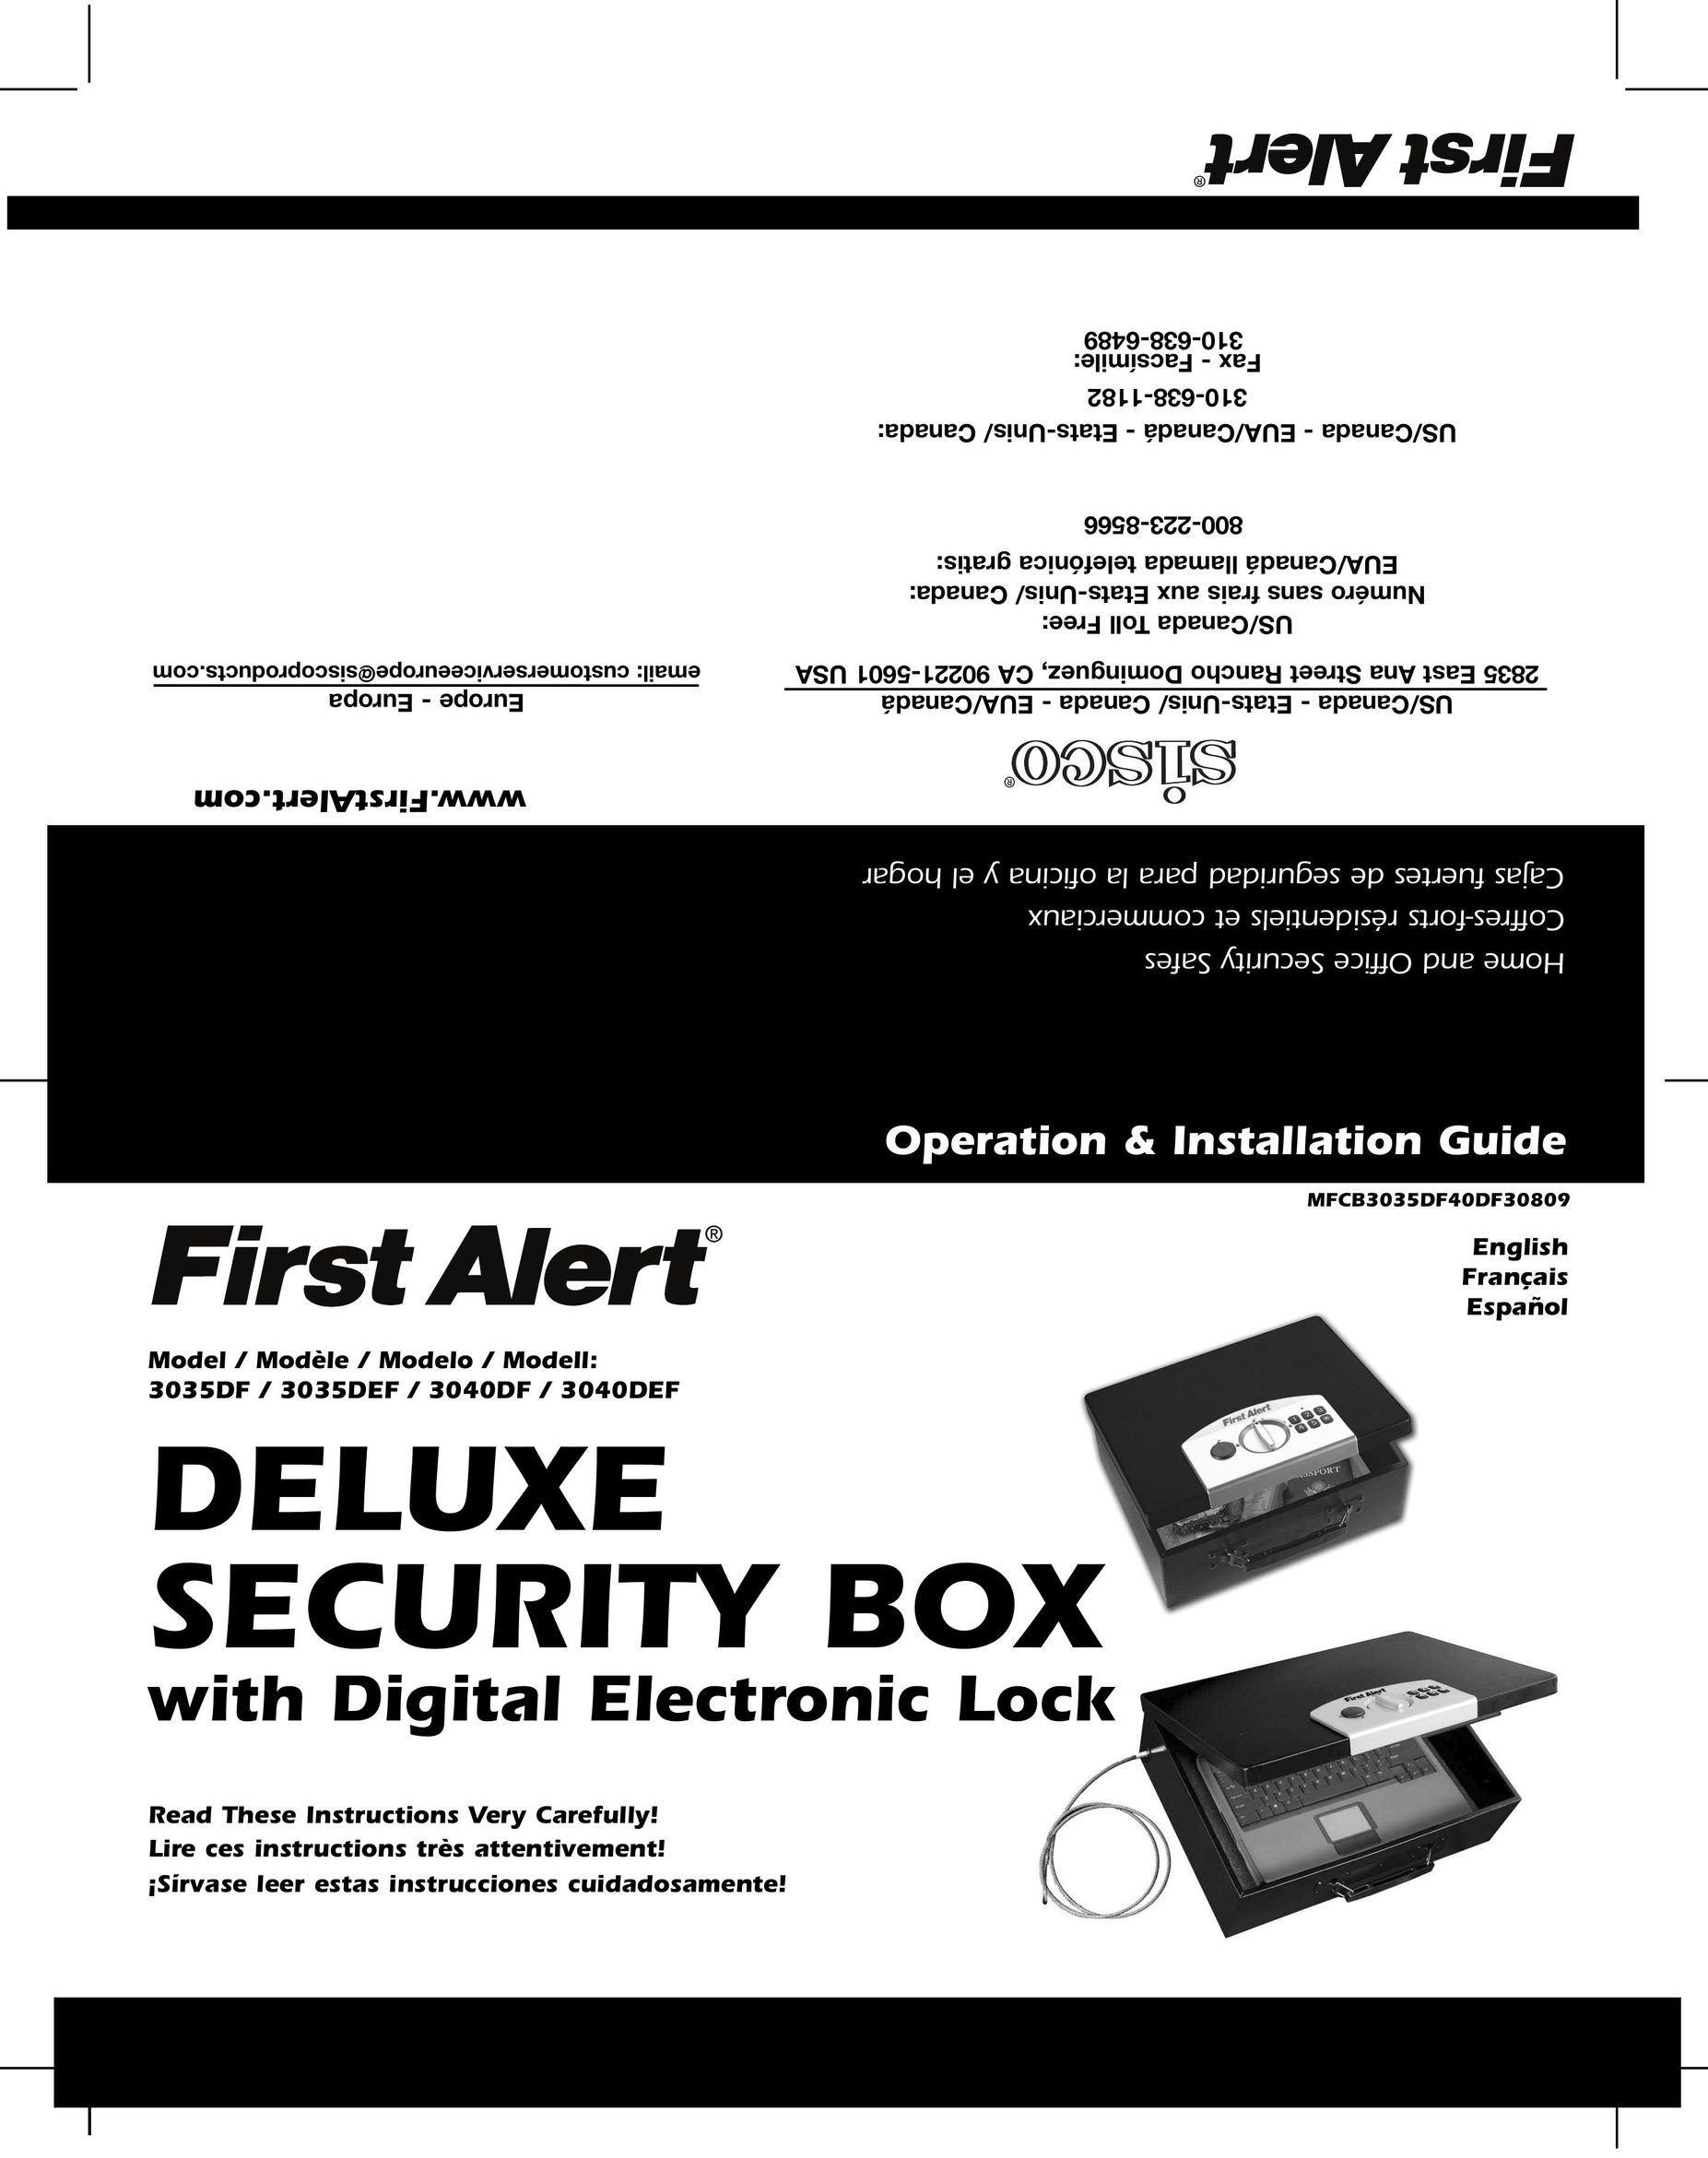 First Alert 3040DF Home Security System User Manual